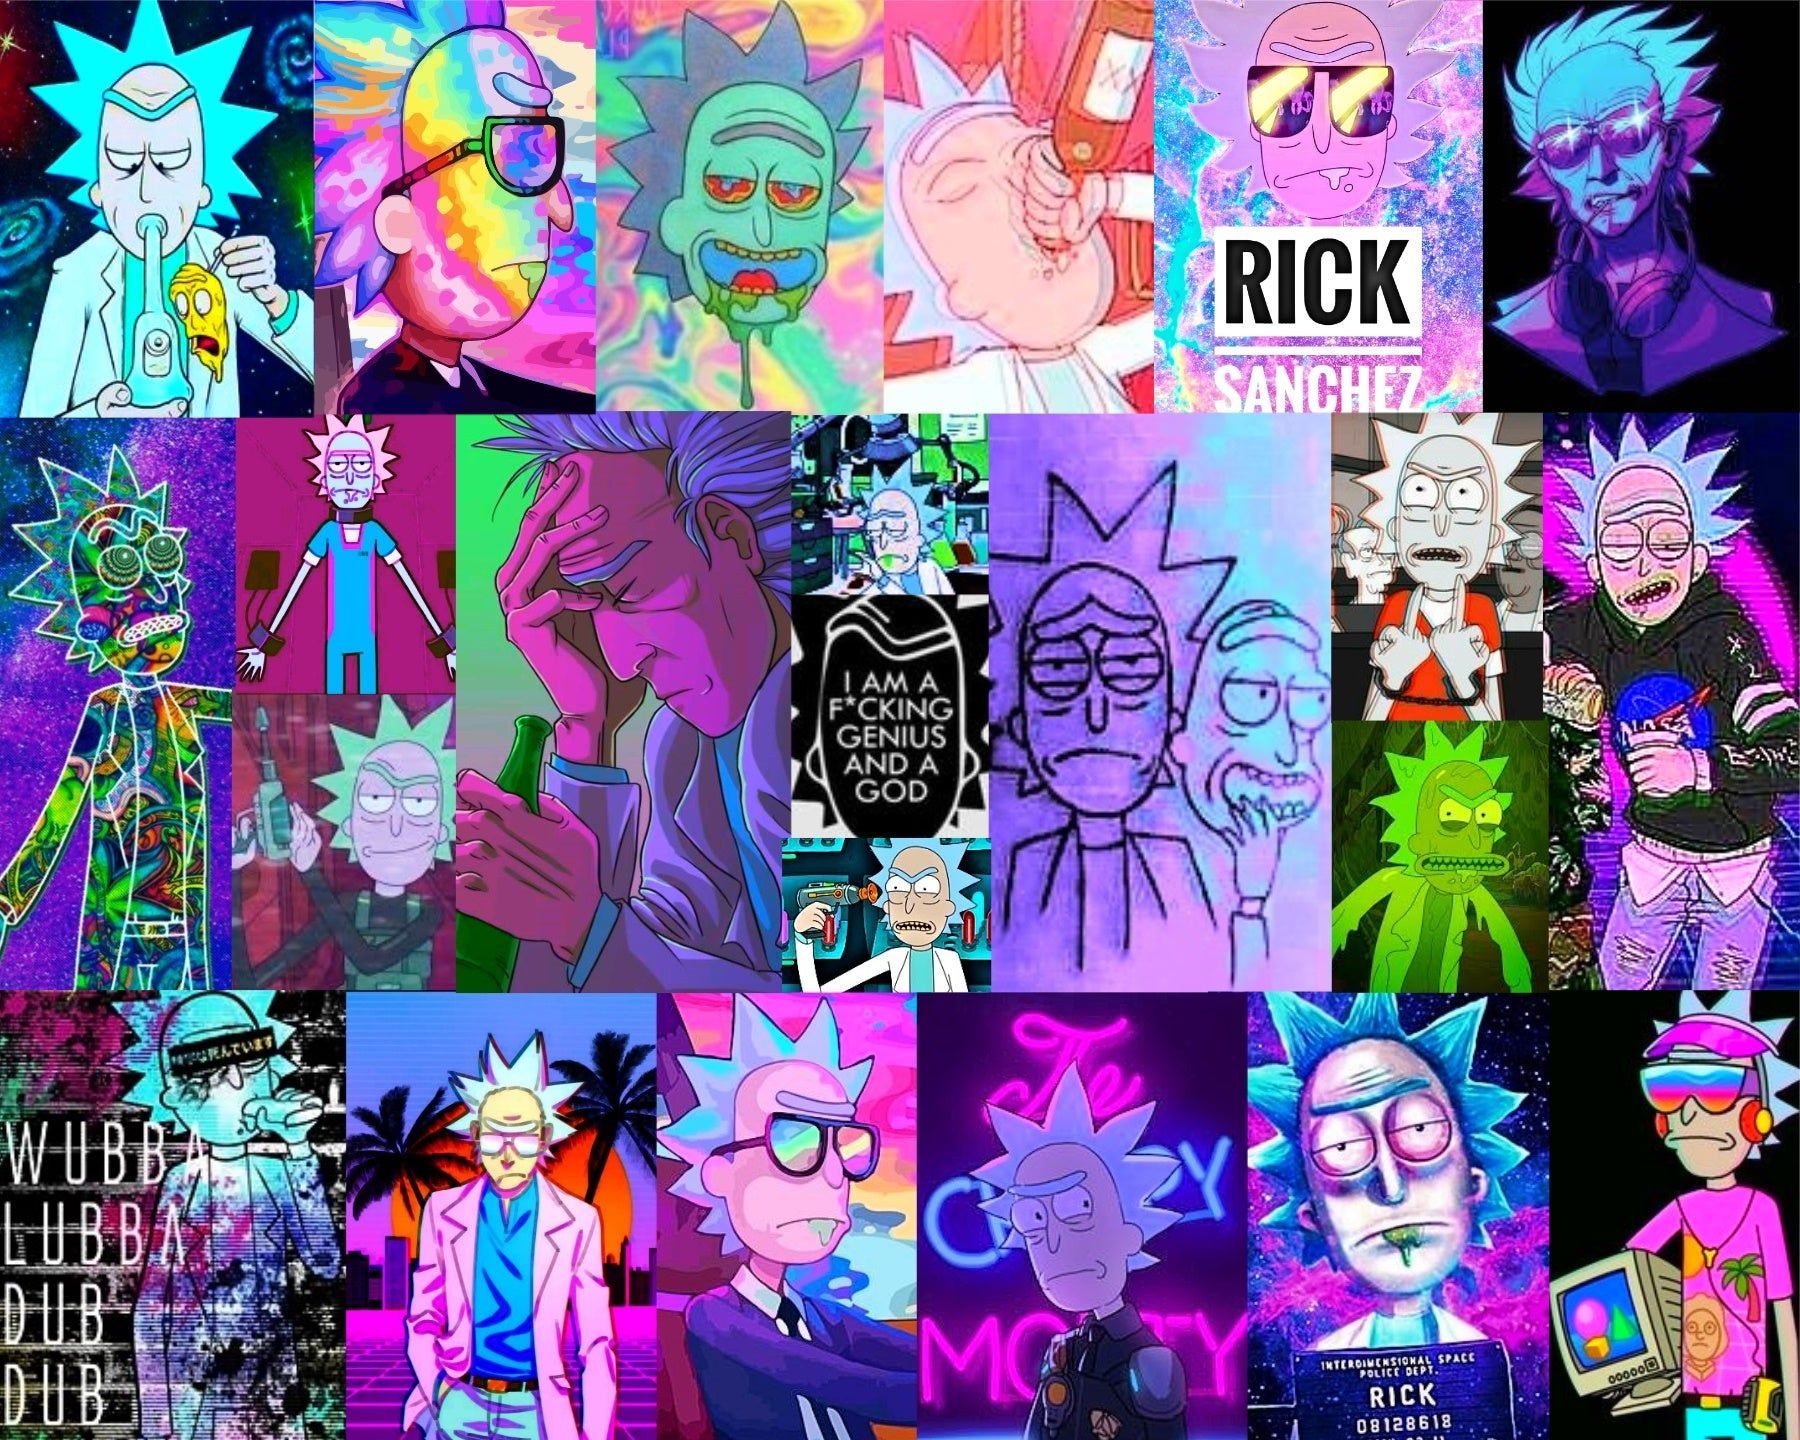 Ricks true aesthetic is being an edgy and depressed Vaporwave Queen